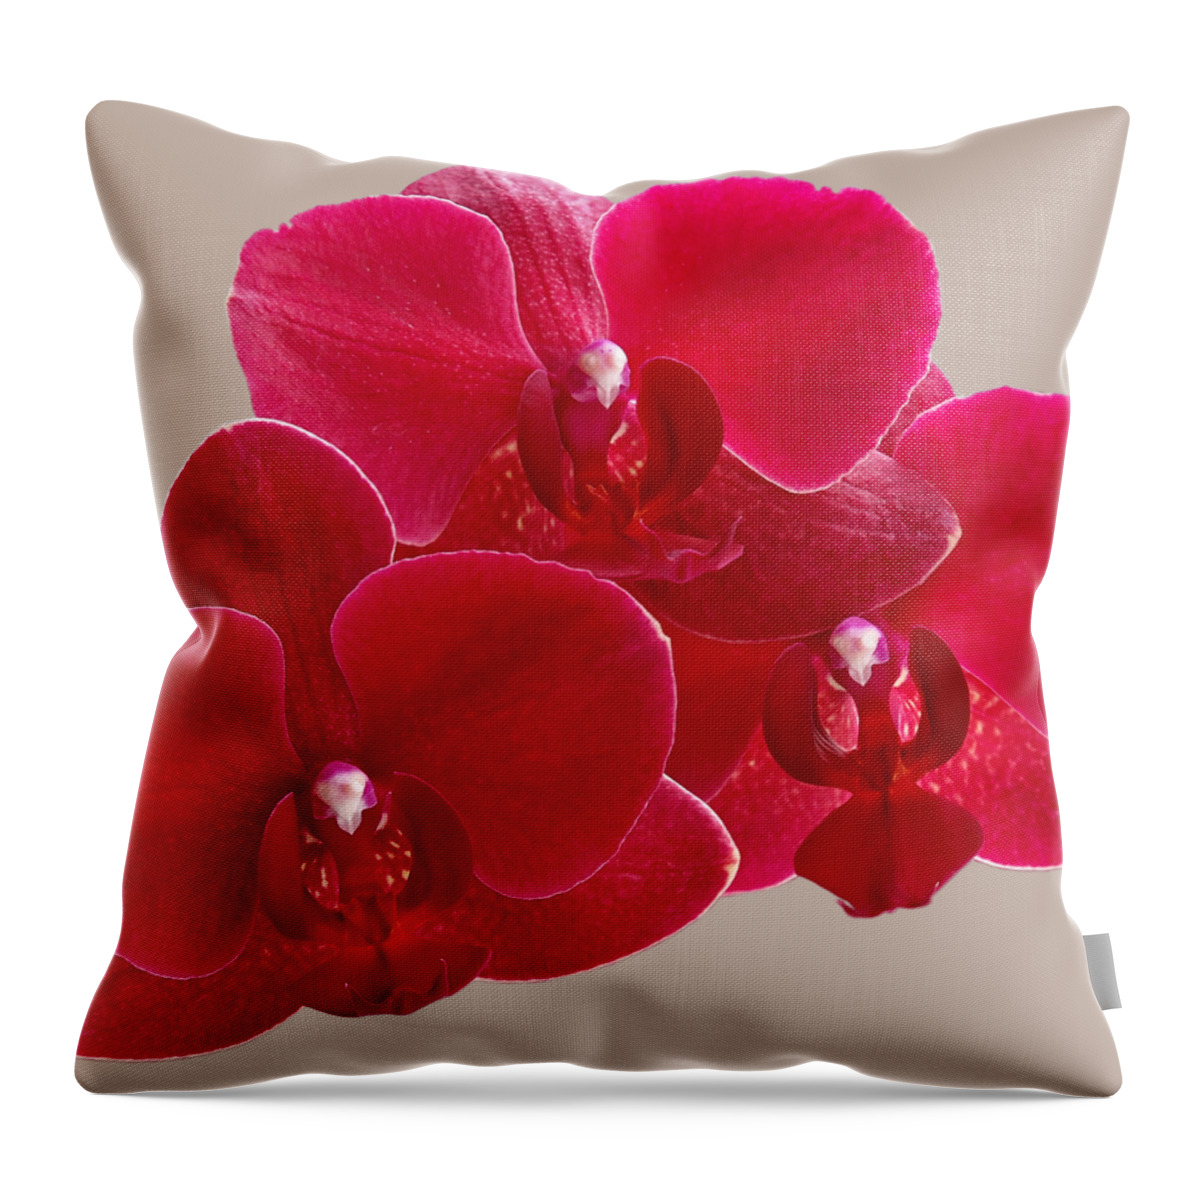 Red Orchid Throw Pillow featuring the photograph Red Orchid Trio by Gill Billington